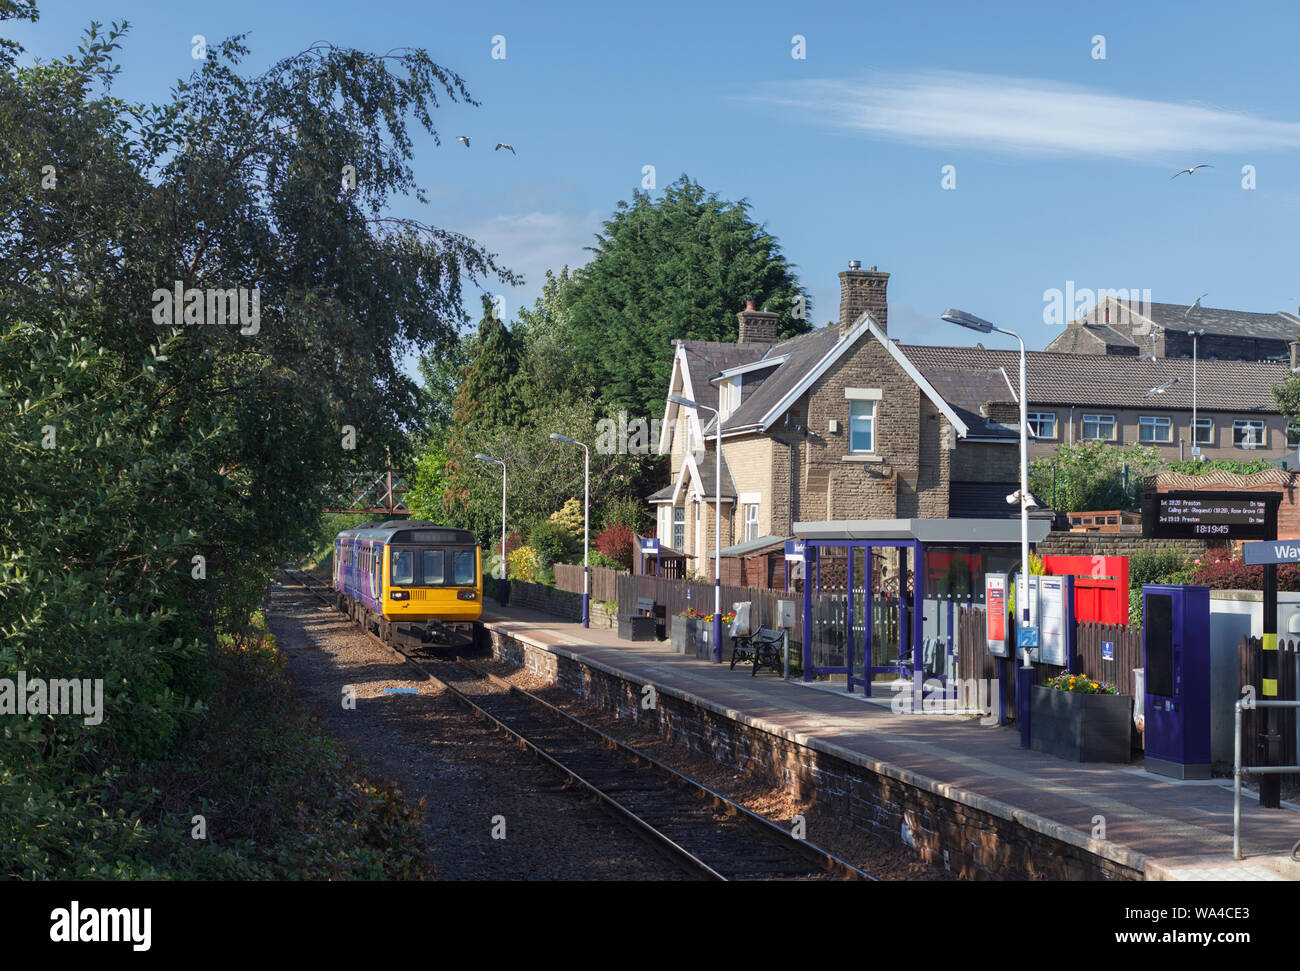 Arriva Northern Rail class 142 pacer train calling at Brierfield station on the single  track Colne line in Lancashire Stock Photo